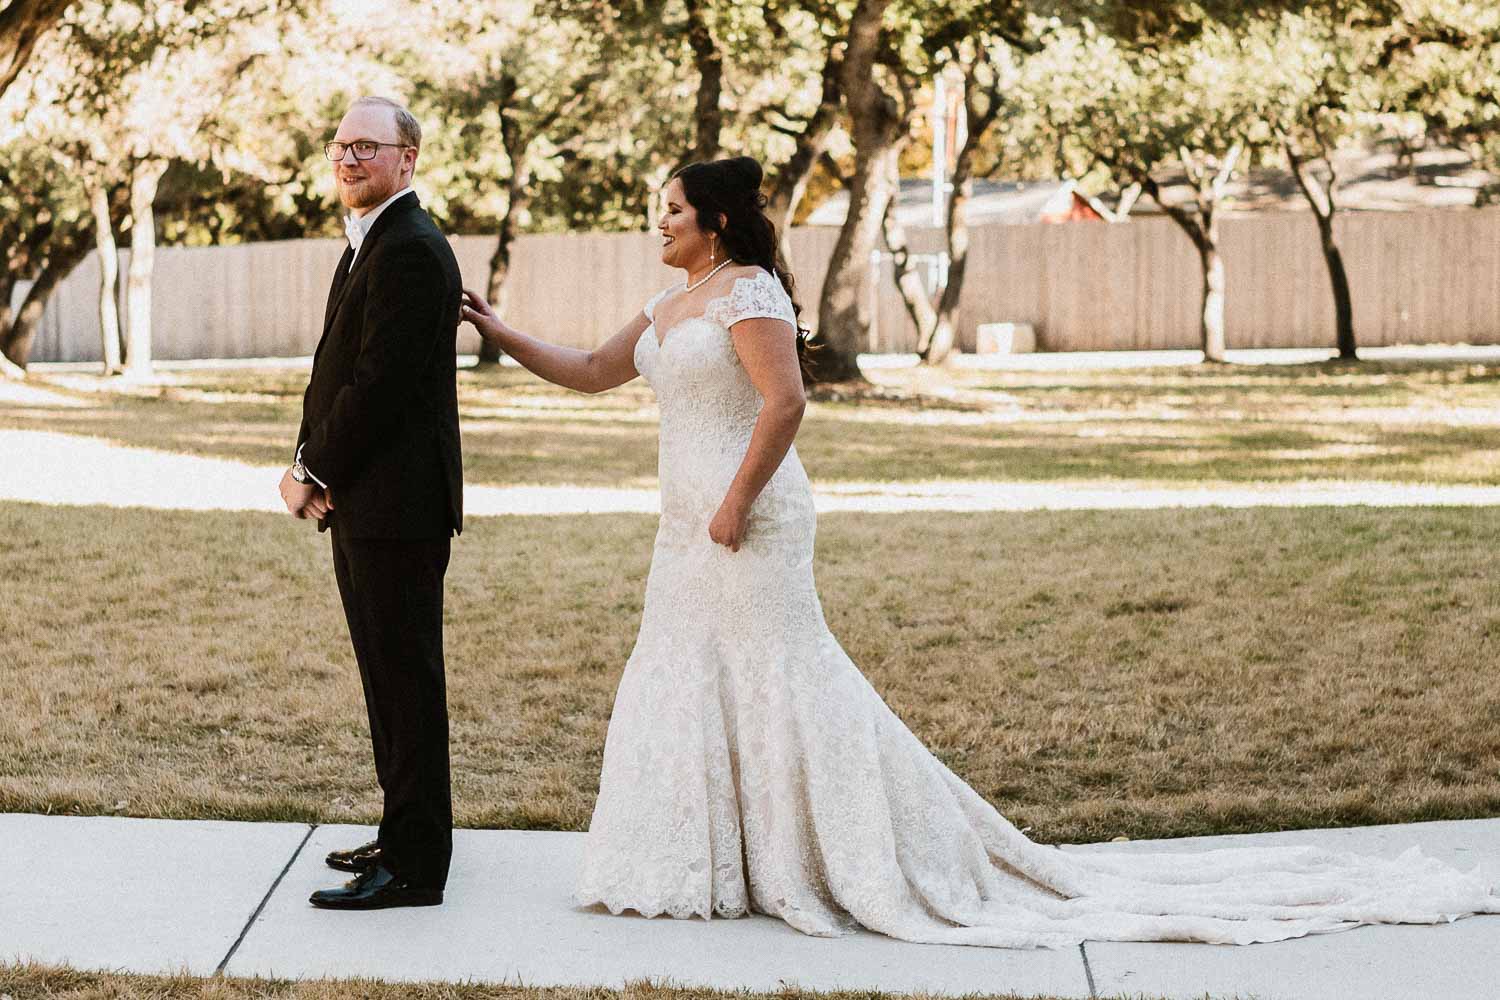 Andrea walks up behind James for their first look - very emotional - 06 The Chandelier of Gruene Wedding Photos -2019-01-09_0001-Philip Thomas Photography